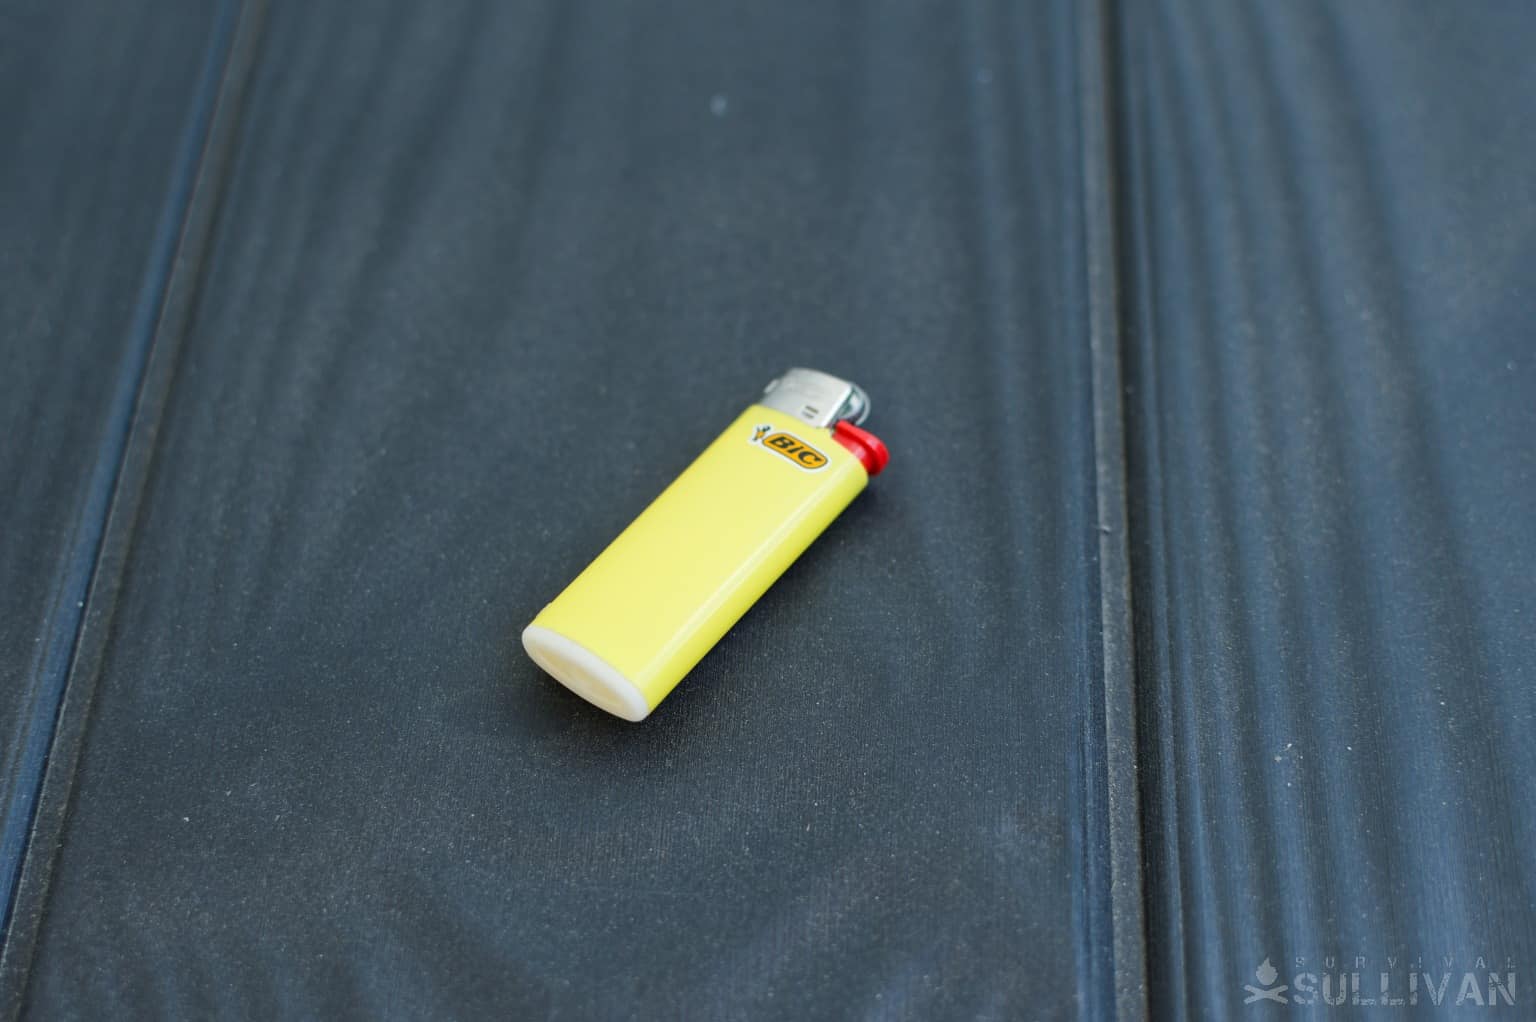 how to make the flame bigger on a bic lighter